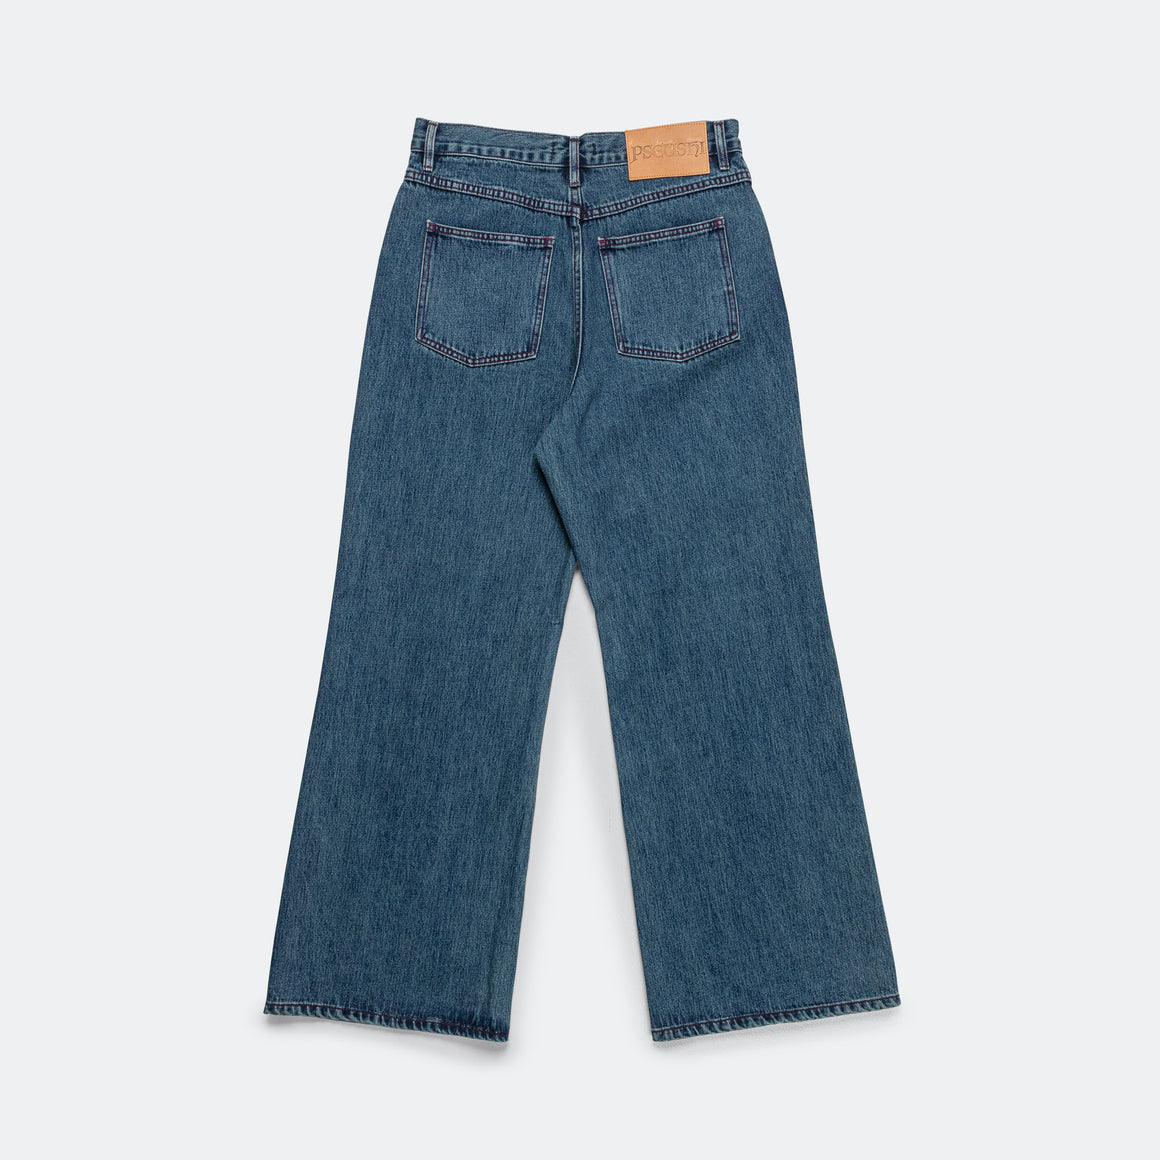 Pseushi - Baggy Jeans - Medium Wash - UP THERE